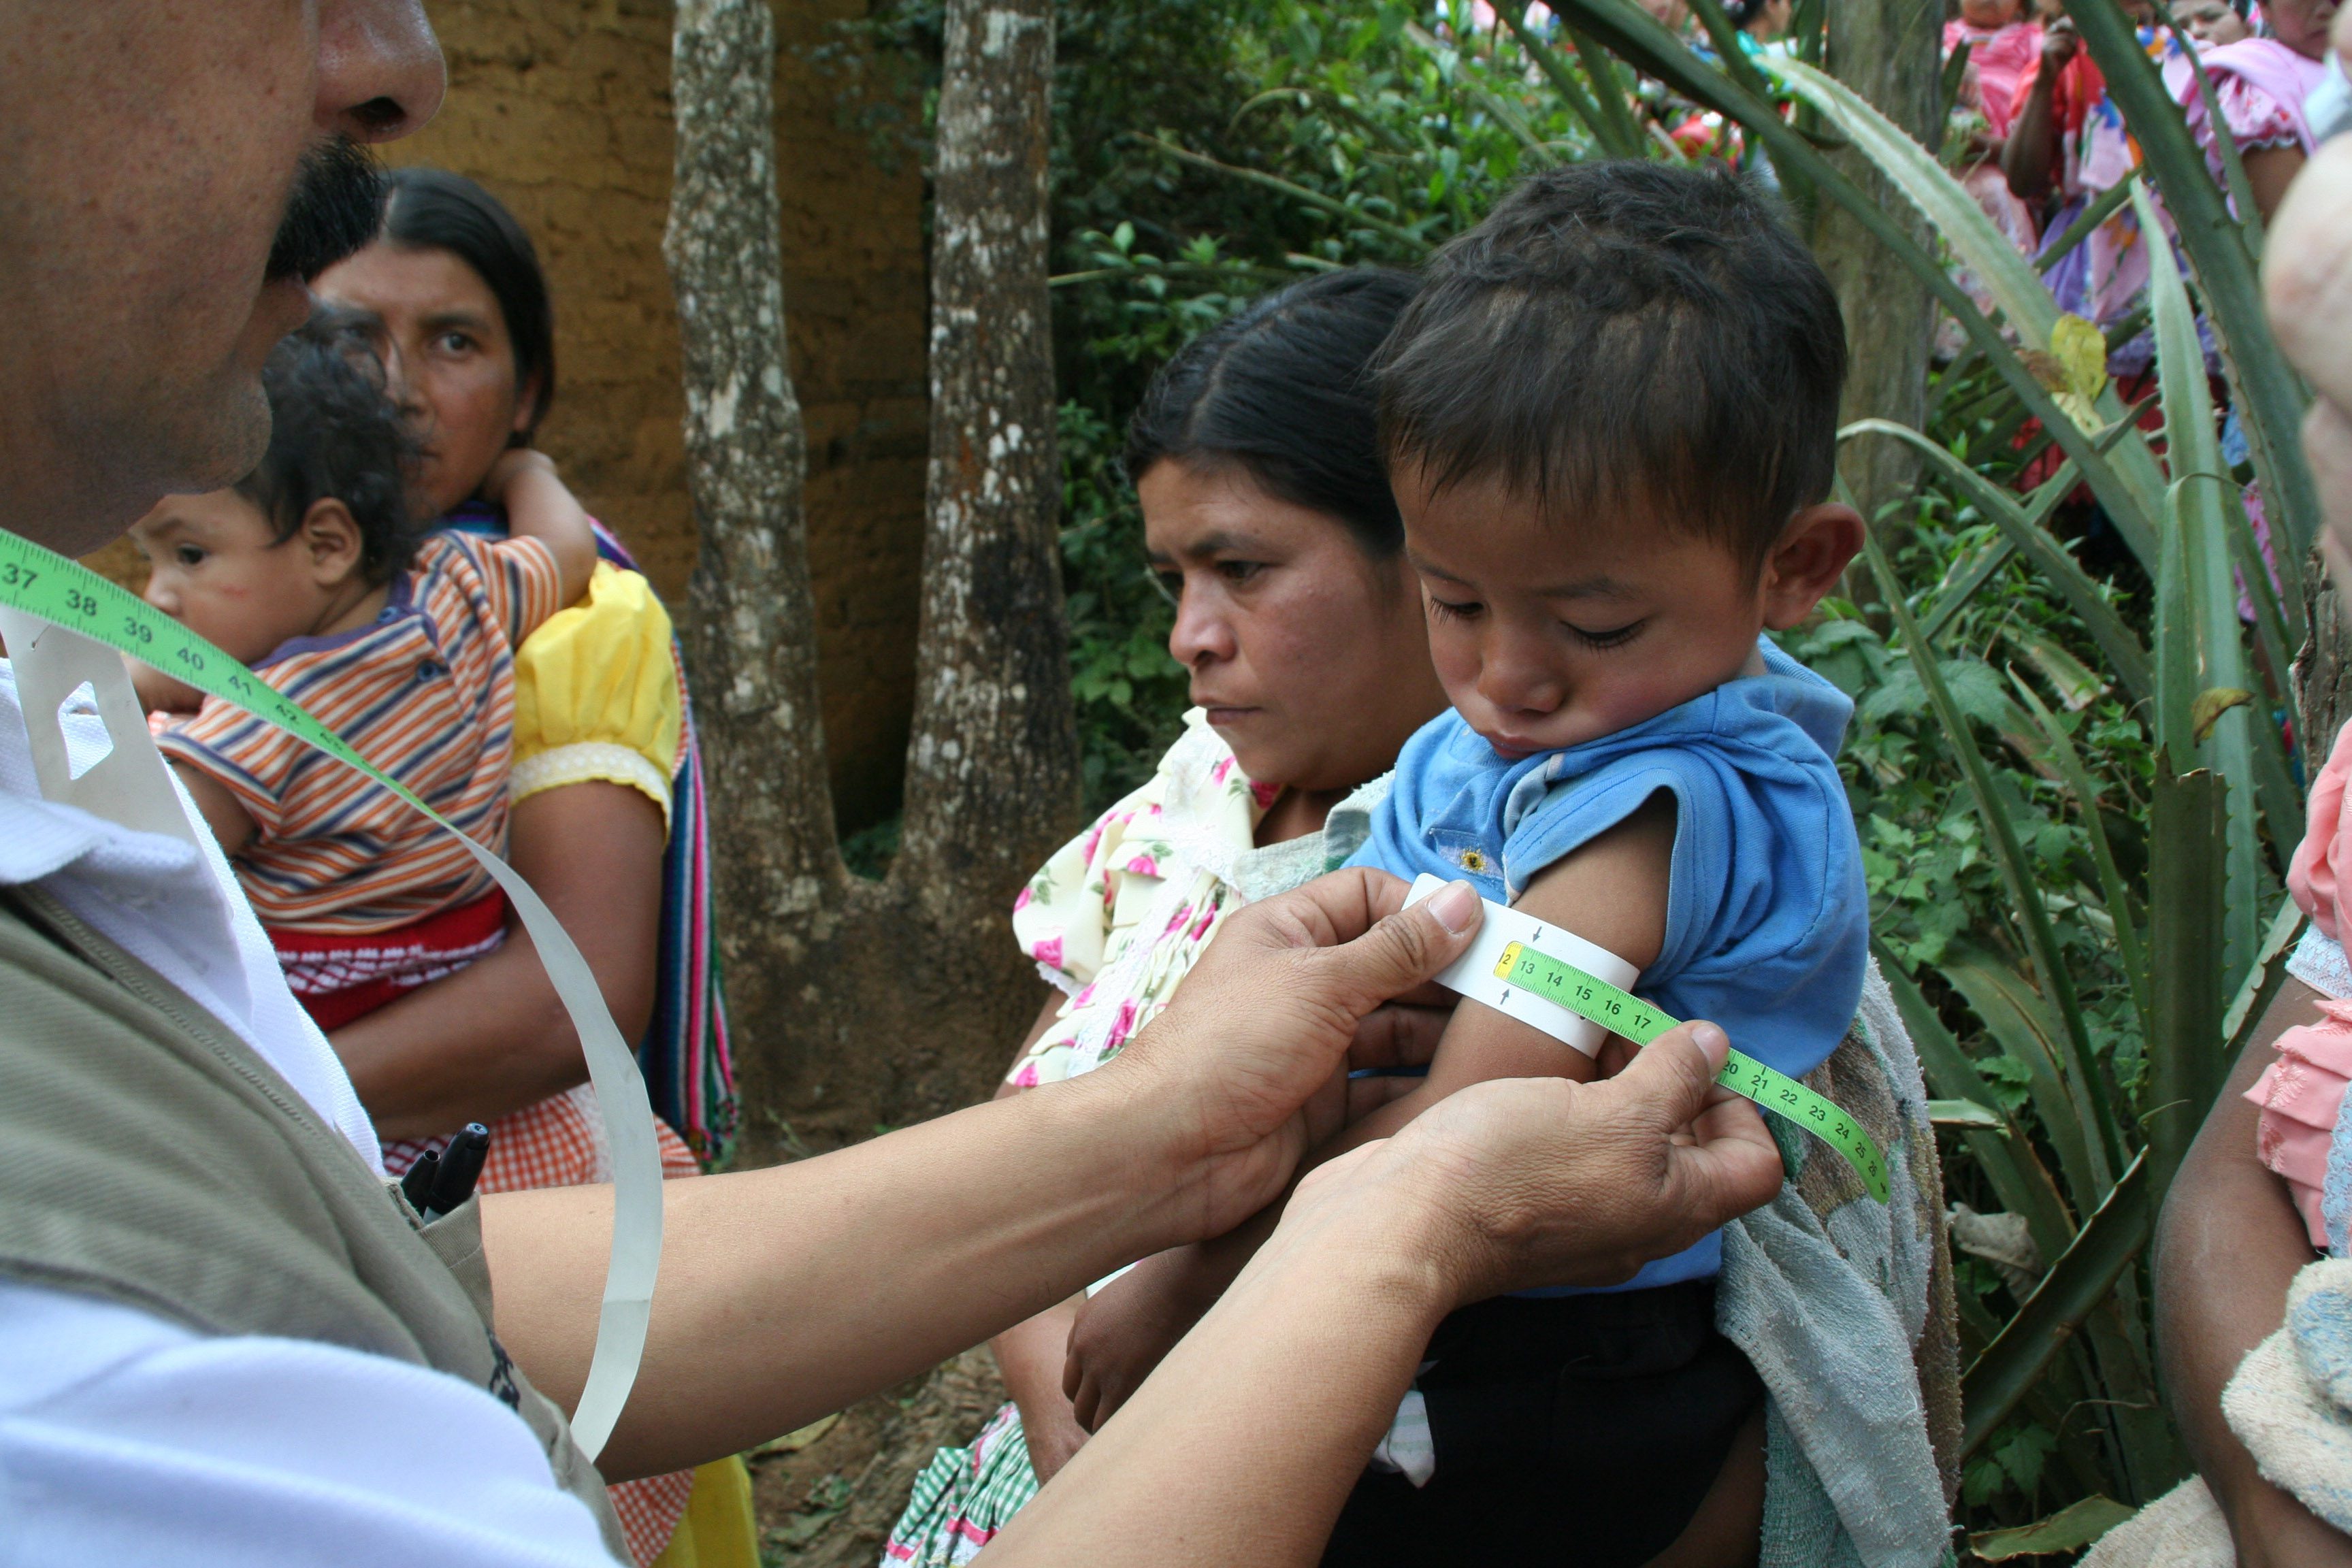 A child gets his arm circumference measured as part of Save the Children's growth monitoring program to check for malnourishment in Chiquimula, Guatemala.Todd Post/Bread for the World Institute.